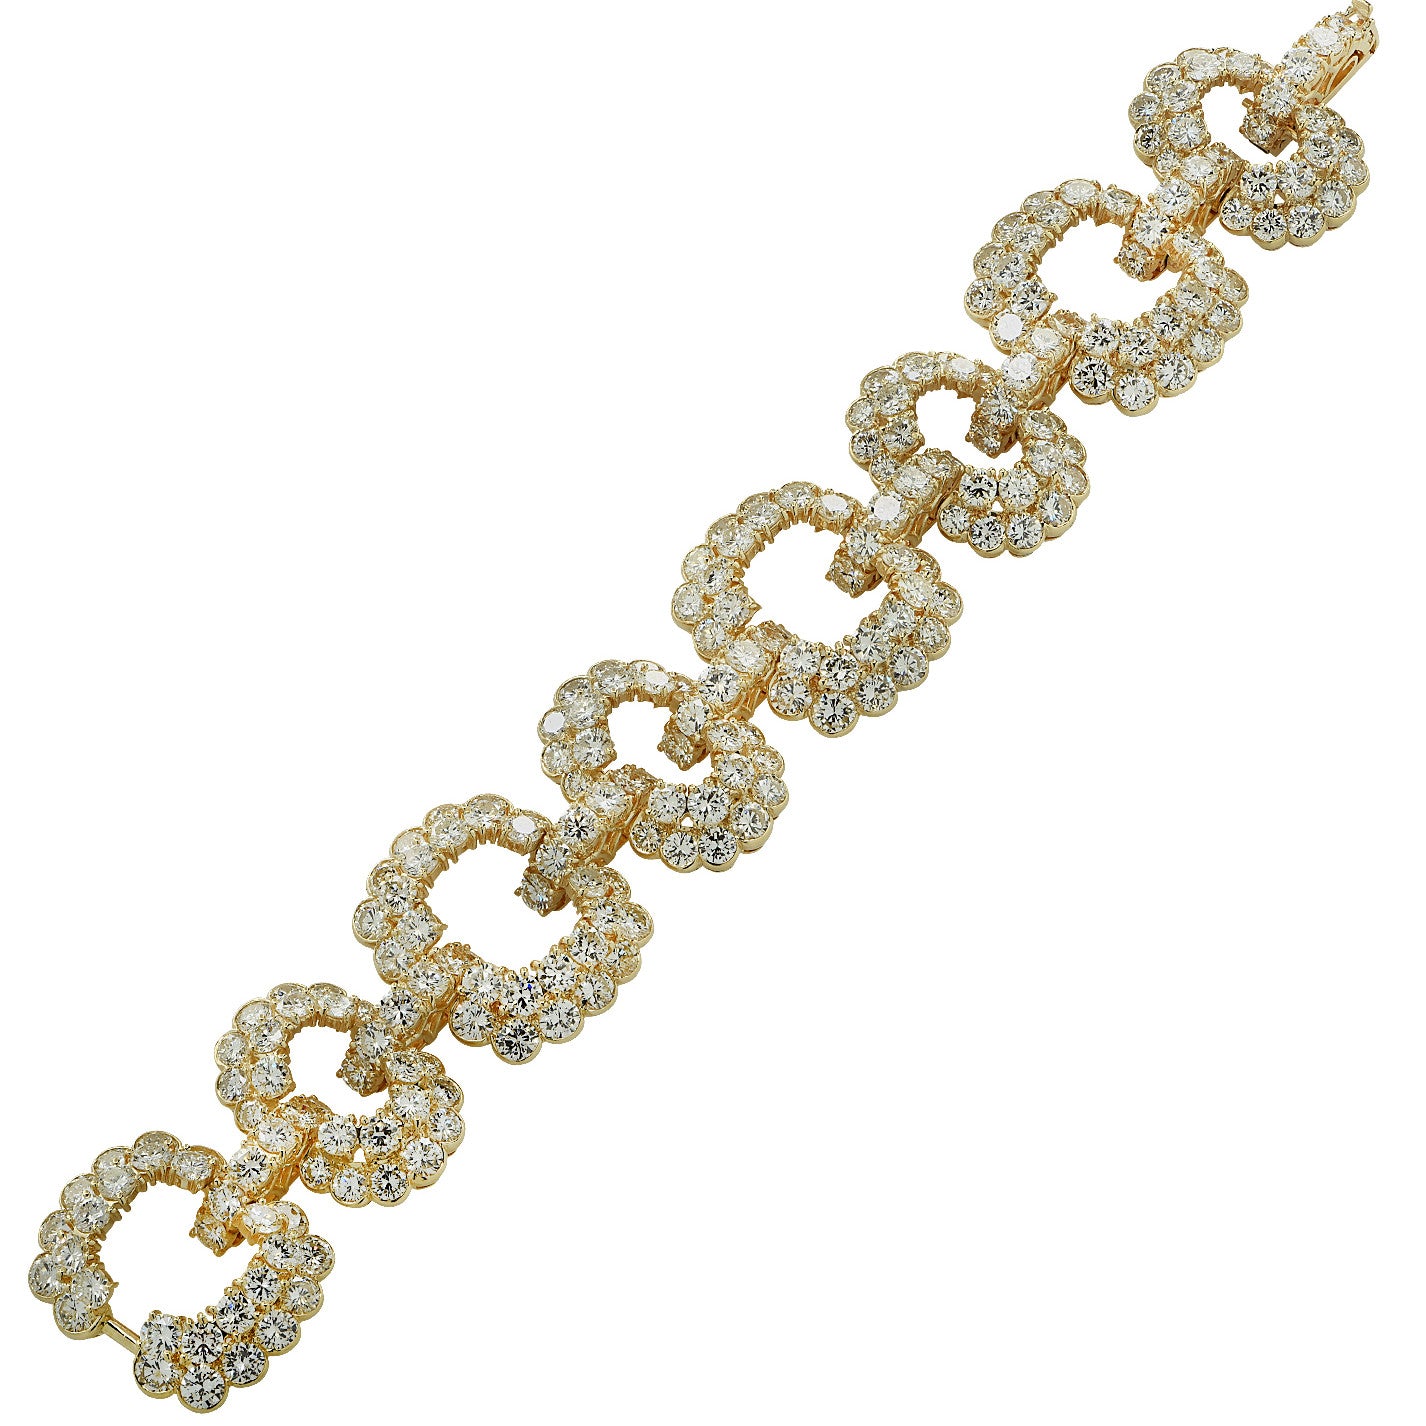 Van Cleef & Arpels 1970s 18KT Yellow Gold Diamond Bracelet laid out front view